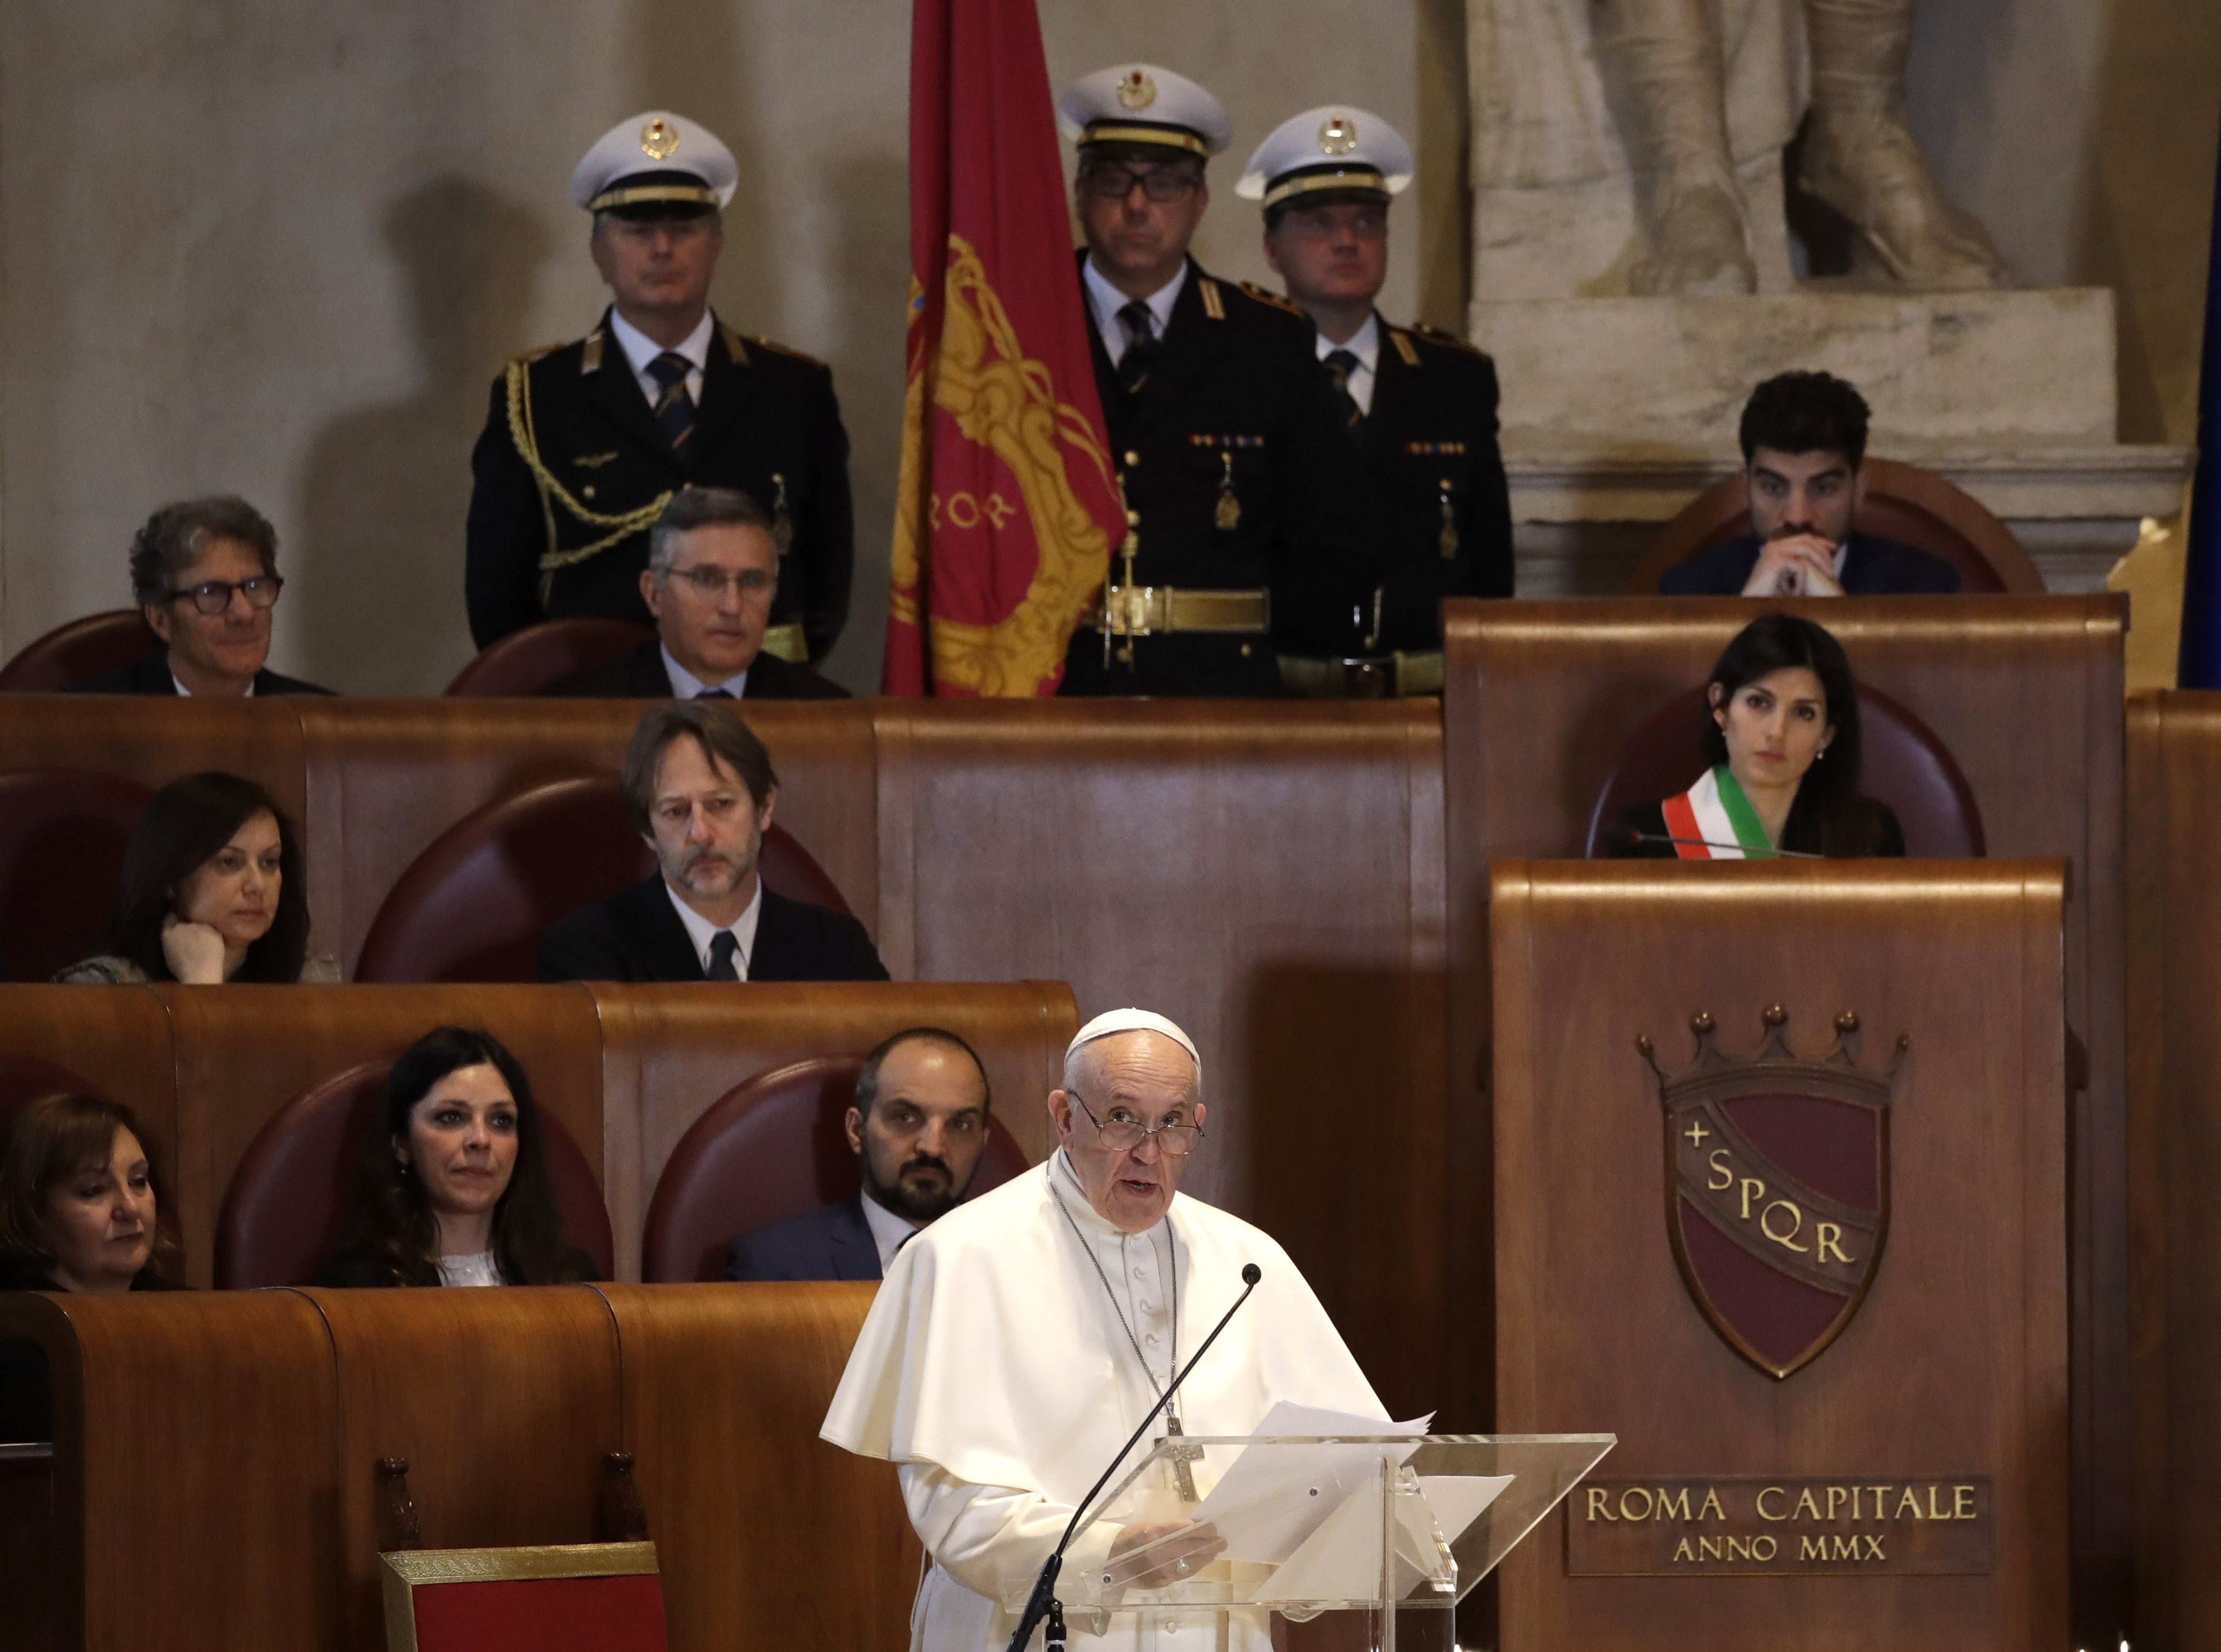 Pope Francis delivers his speech in the Julius Caesar Hall as Rome's Mayor Virginia Raggi, right, listen to him during his visit to the Campidoglio, Capitol Hill, in Rome, Tuesday, March 26, 2019. (AP Photo/Alessandra Tarantino)